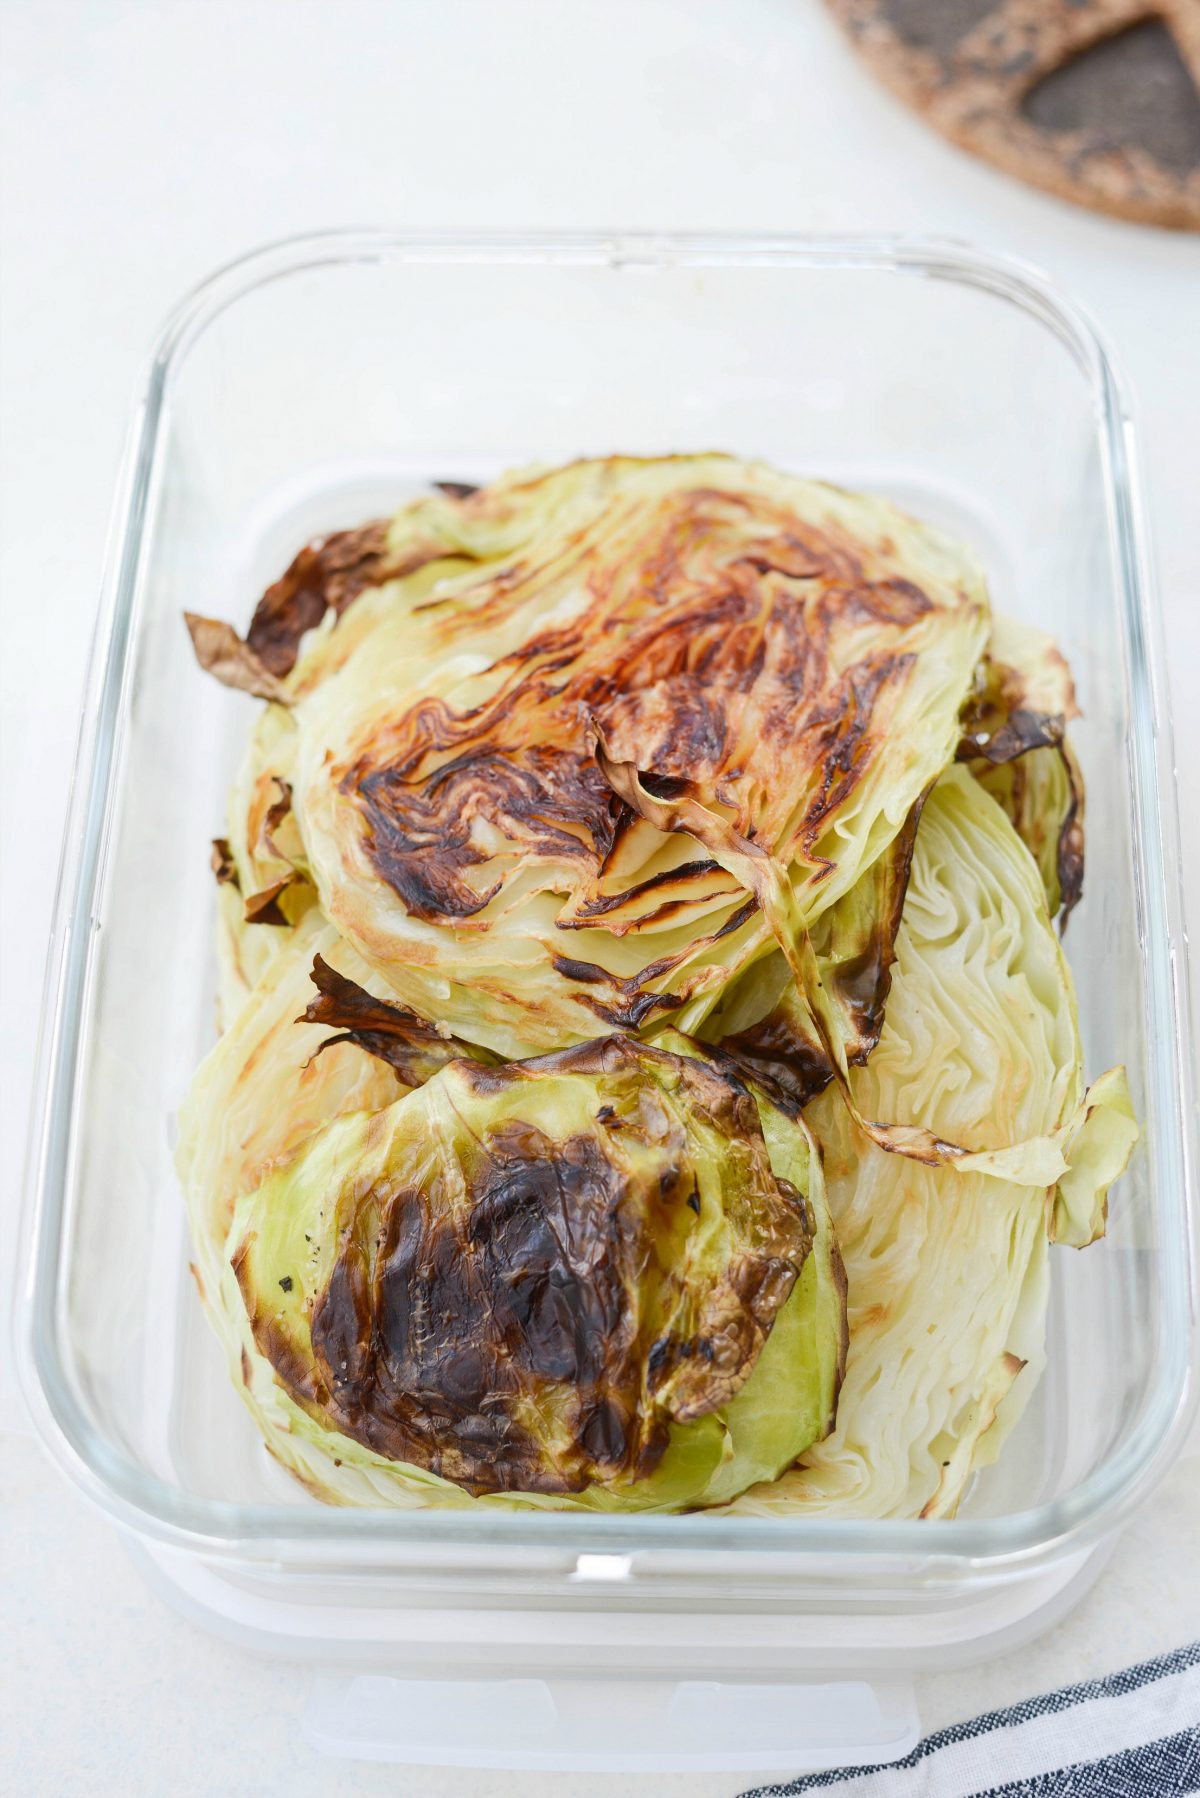 Leftover roasted cabbage